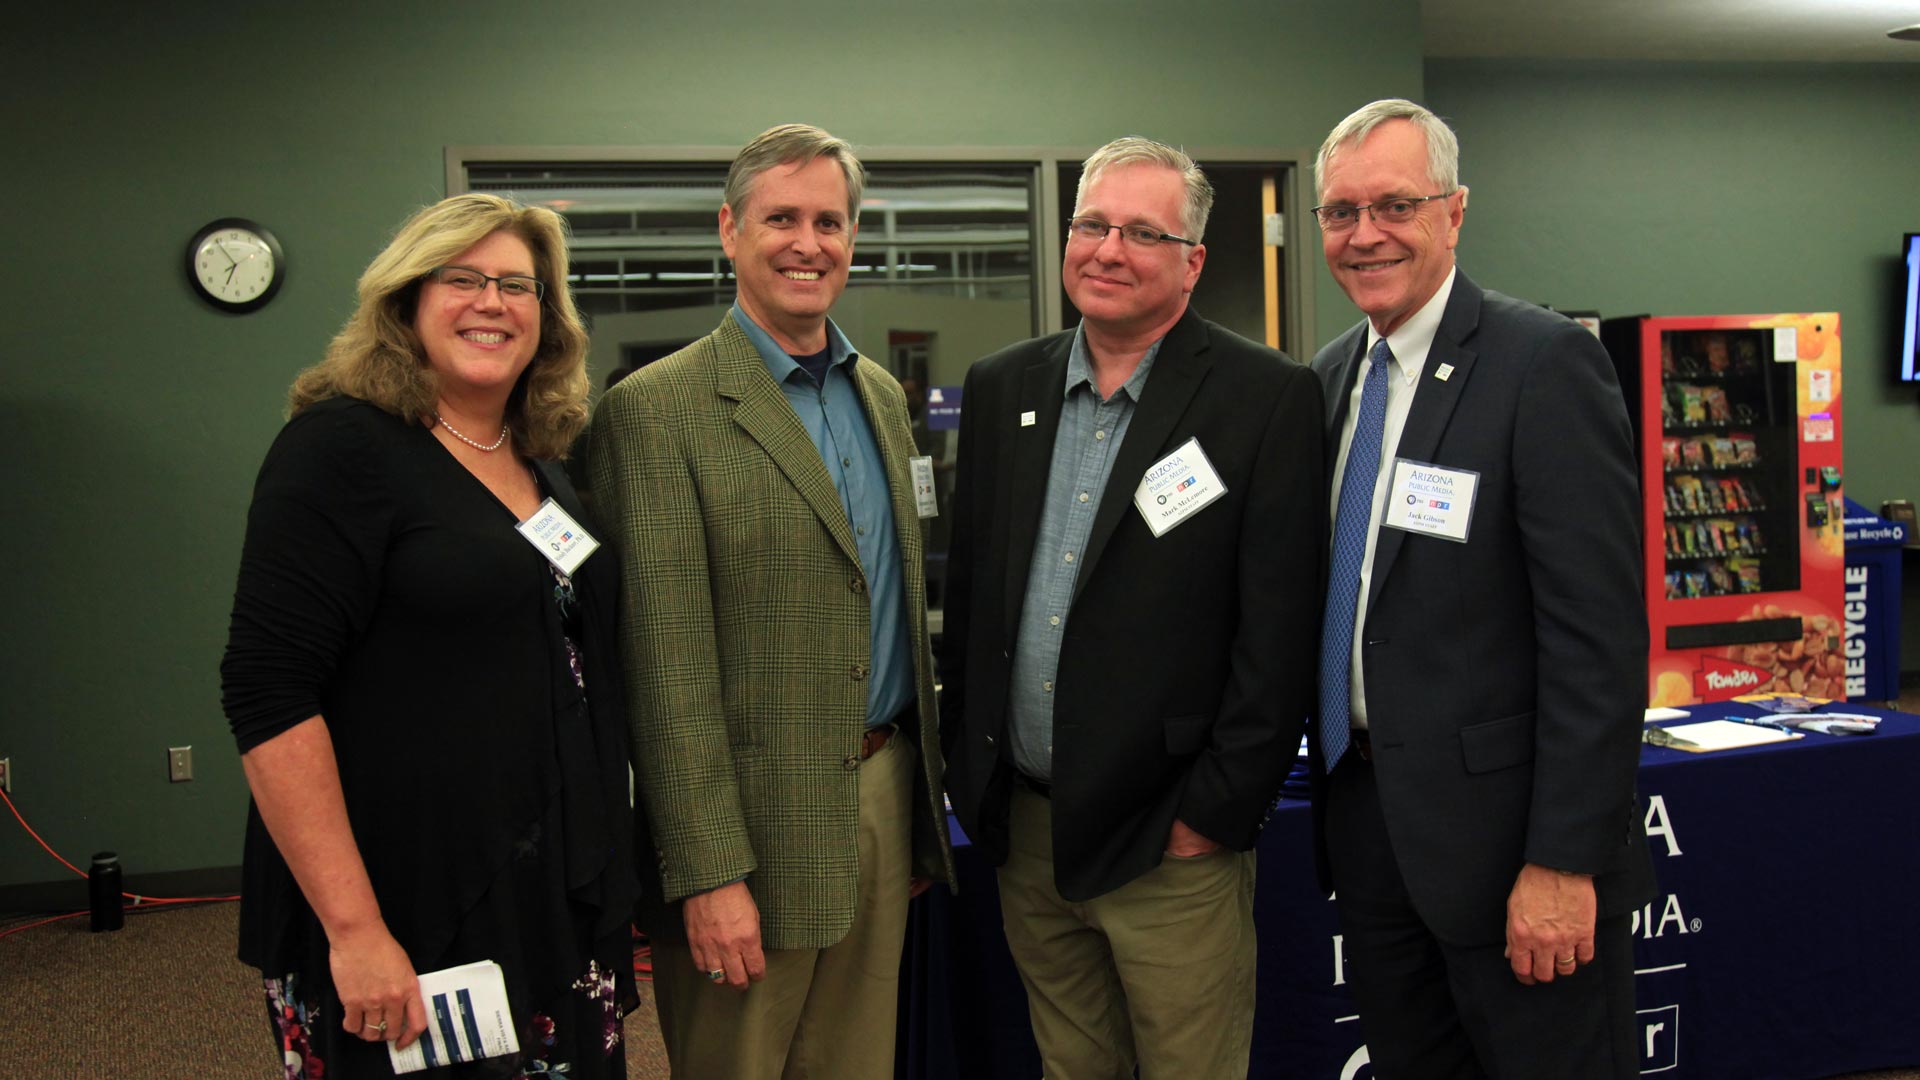 UA Sierra Vista hosted AZPM for the launch of KUAS 88.9 FM. L to R: Melody Buckner, Ph.D., dean of UA Sierra Vista; Christopher Conover, host of The Buzz; Mark McLemore, host of Arizona Spotlight; Jack Gibson, CEO of AZPM